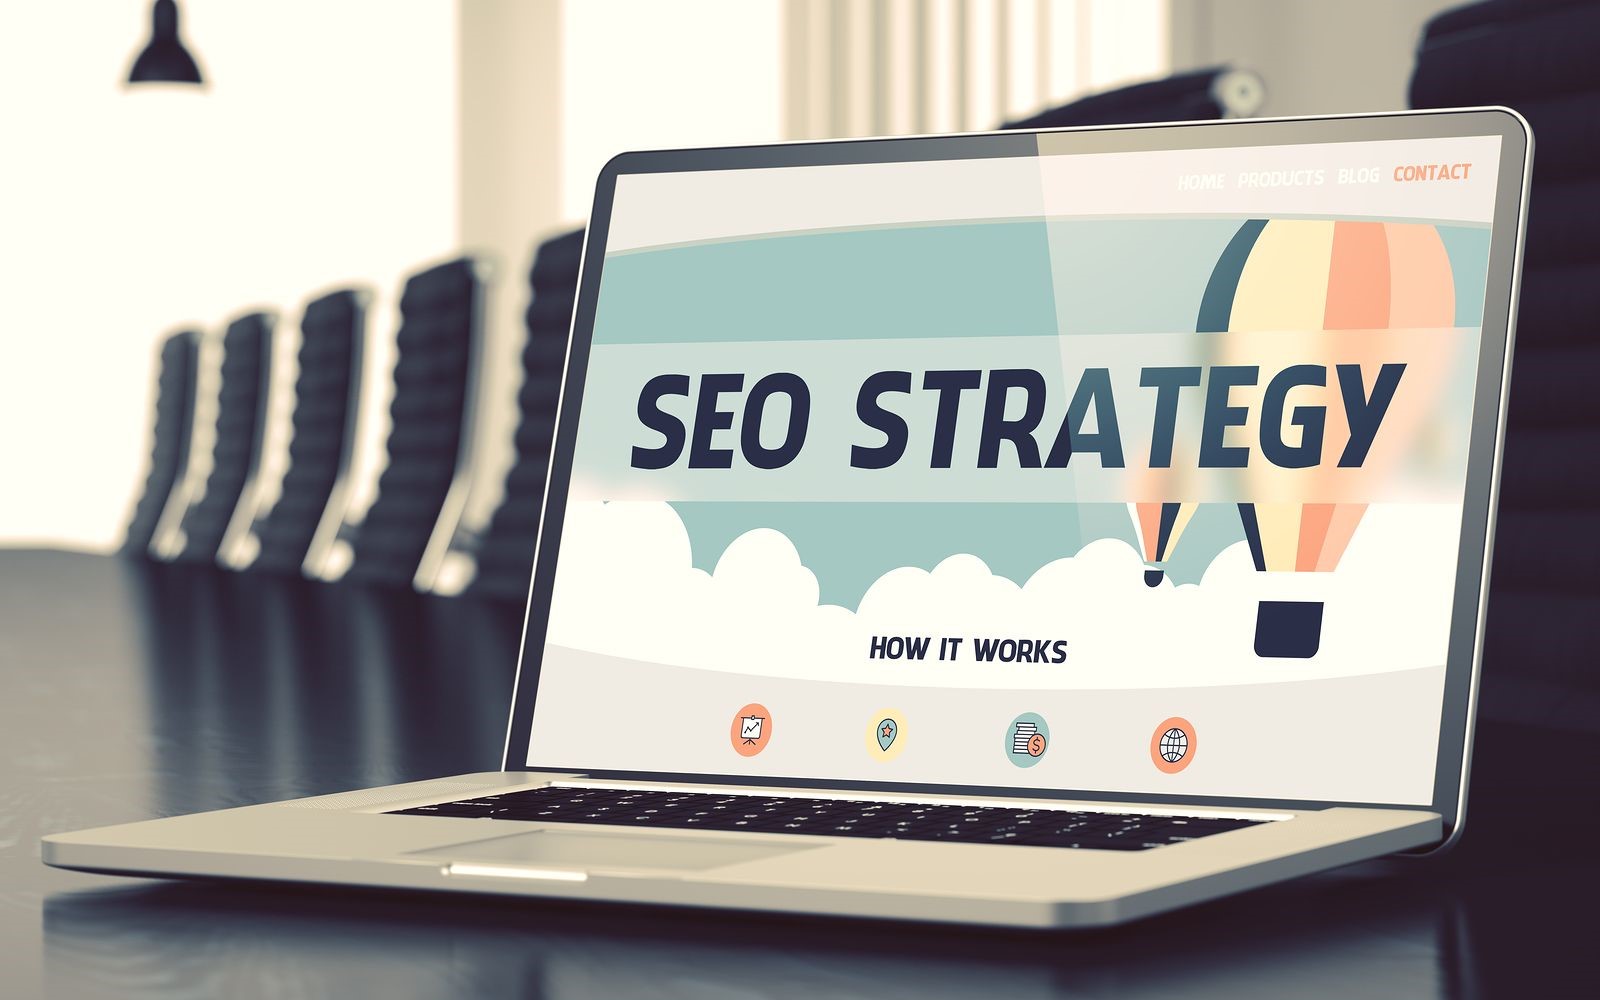 Why You Should Hire SEO Companies to Do Your SEO Strategies for You